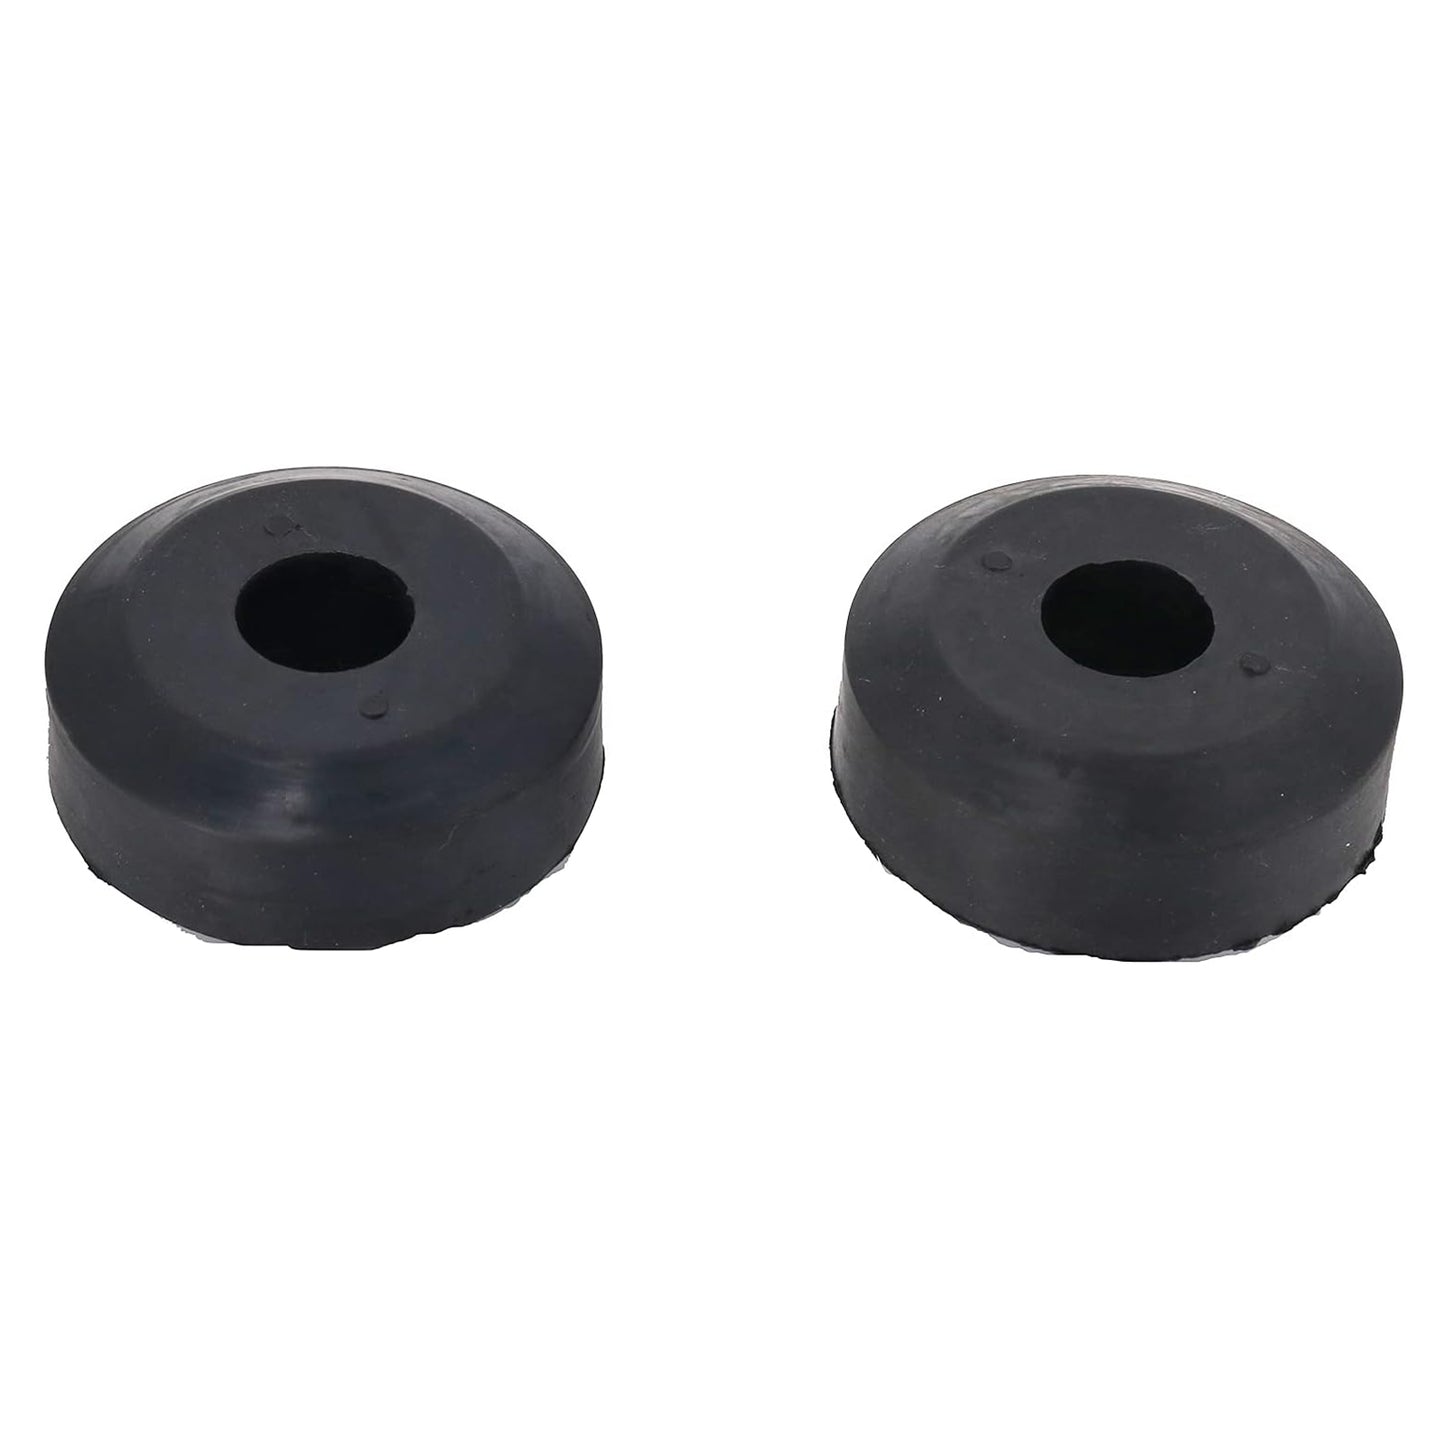 2X 6668104 Rubber Engine Mounts Compatible With Bobcat 653 751 753 763 773 7753 853 863